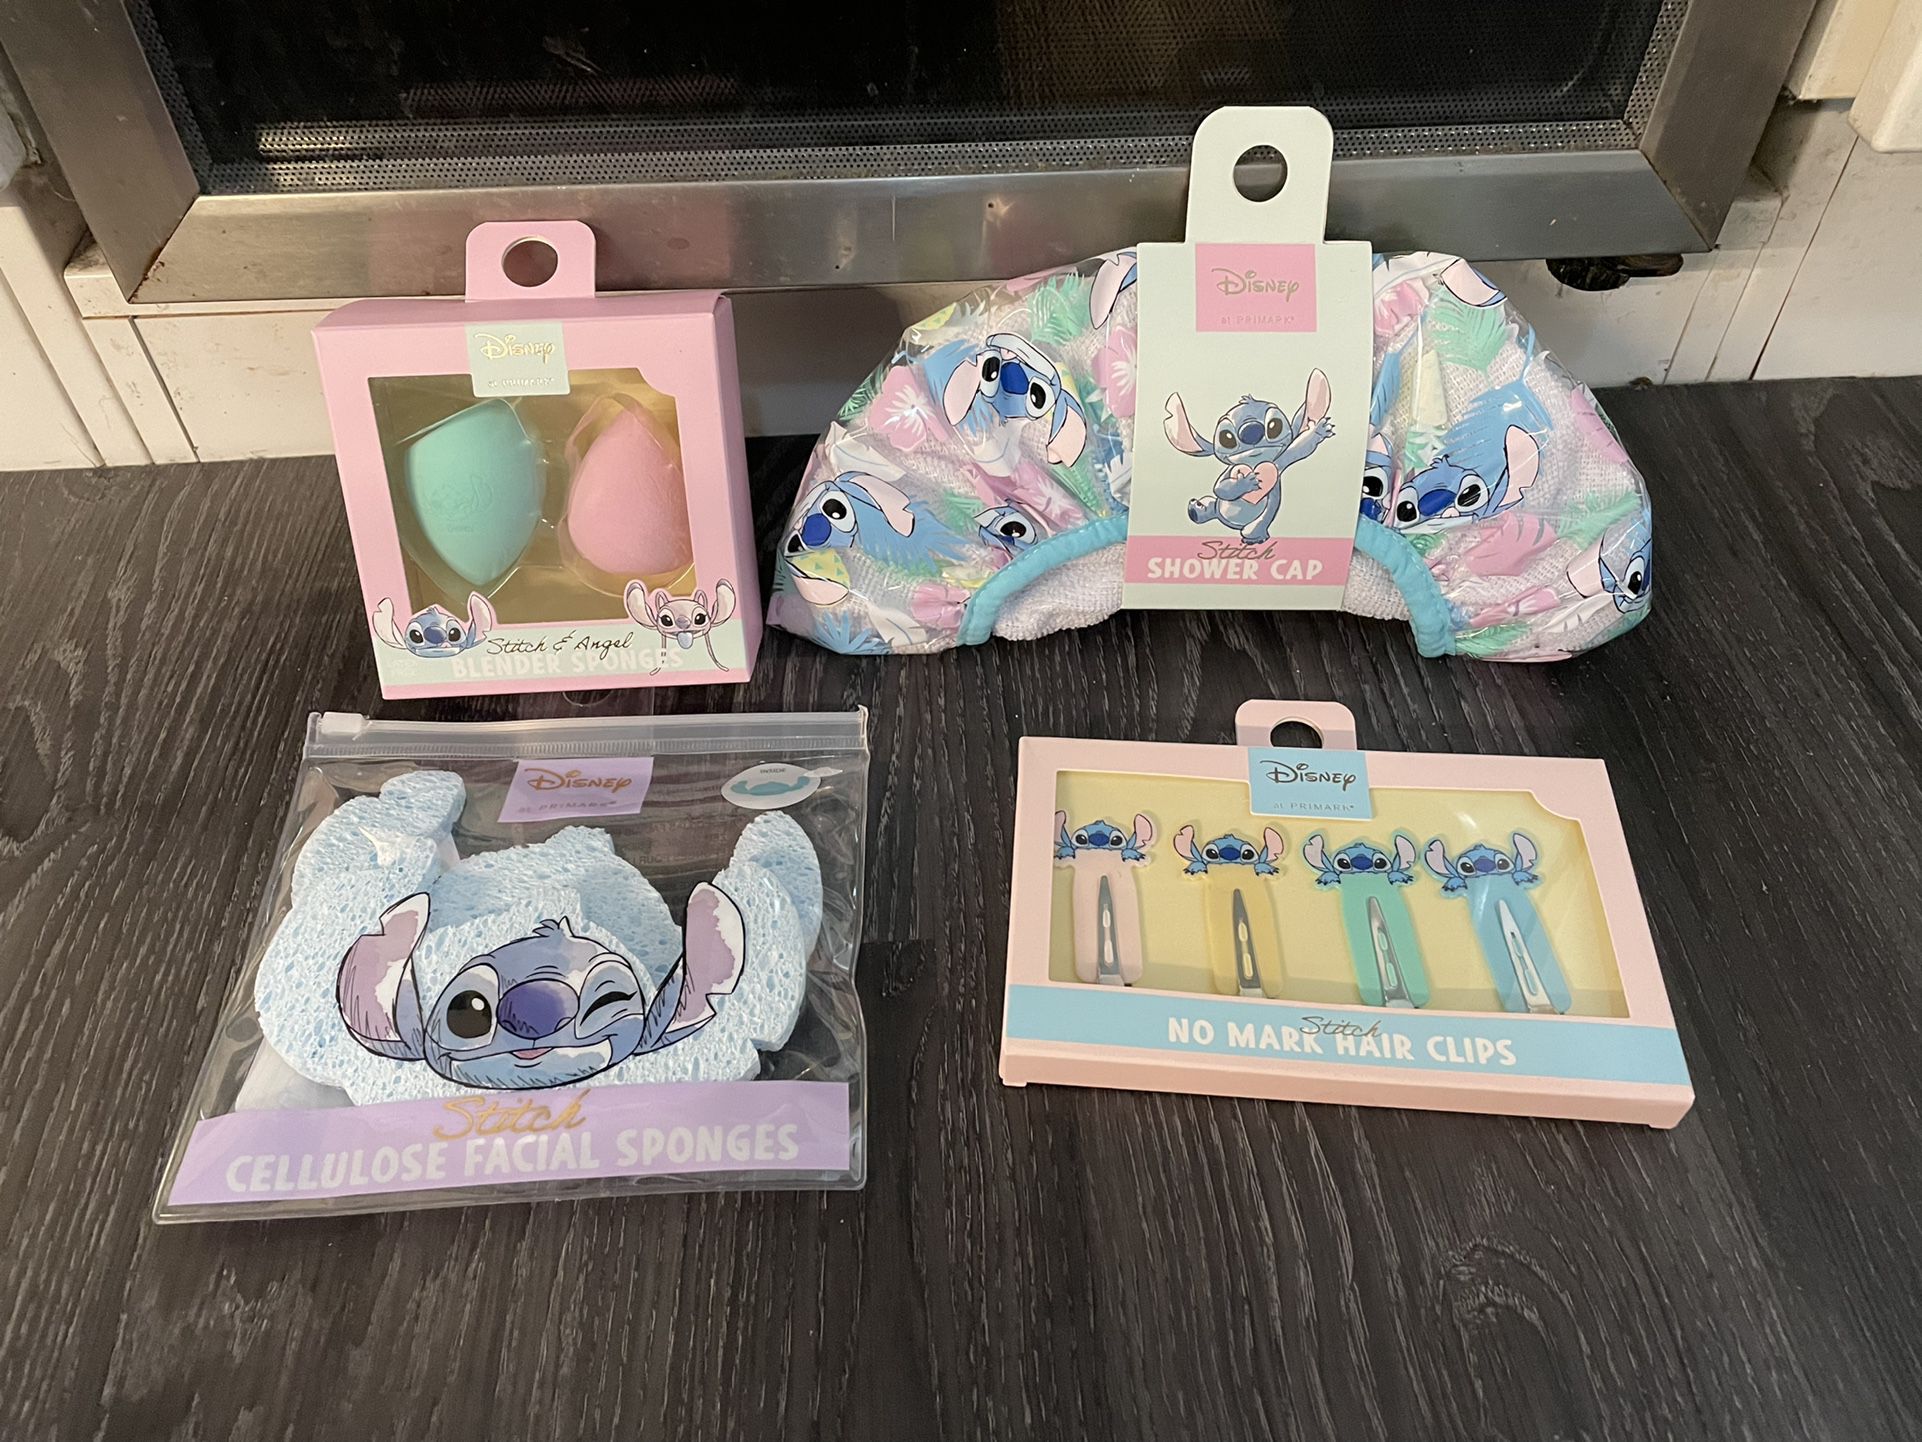 NWT Lilo And Stitch Hair Clips, Blender Sponges, Facial Sponges, And Showercap